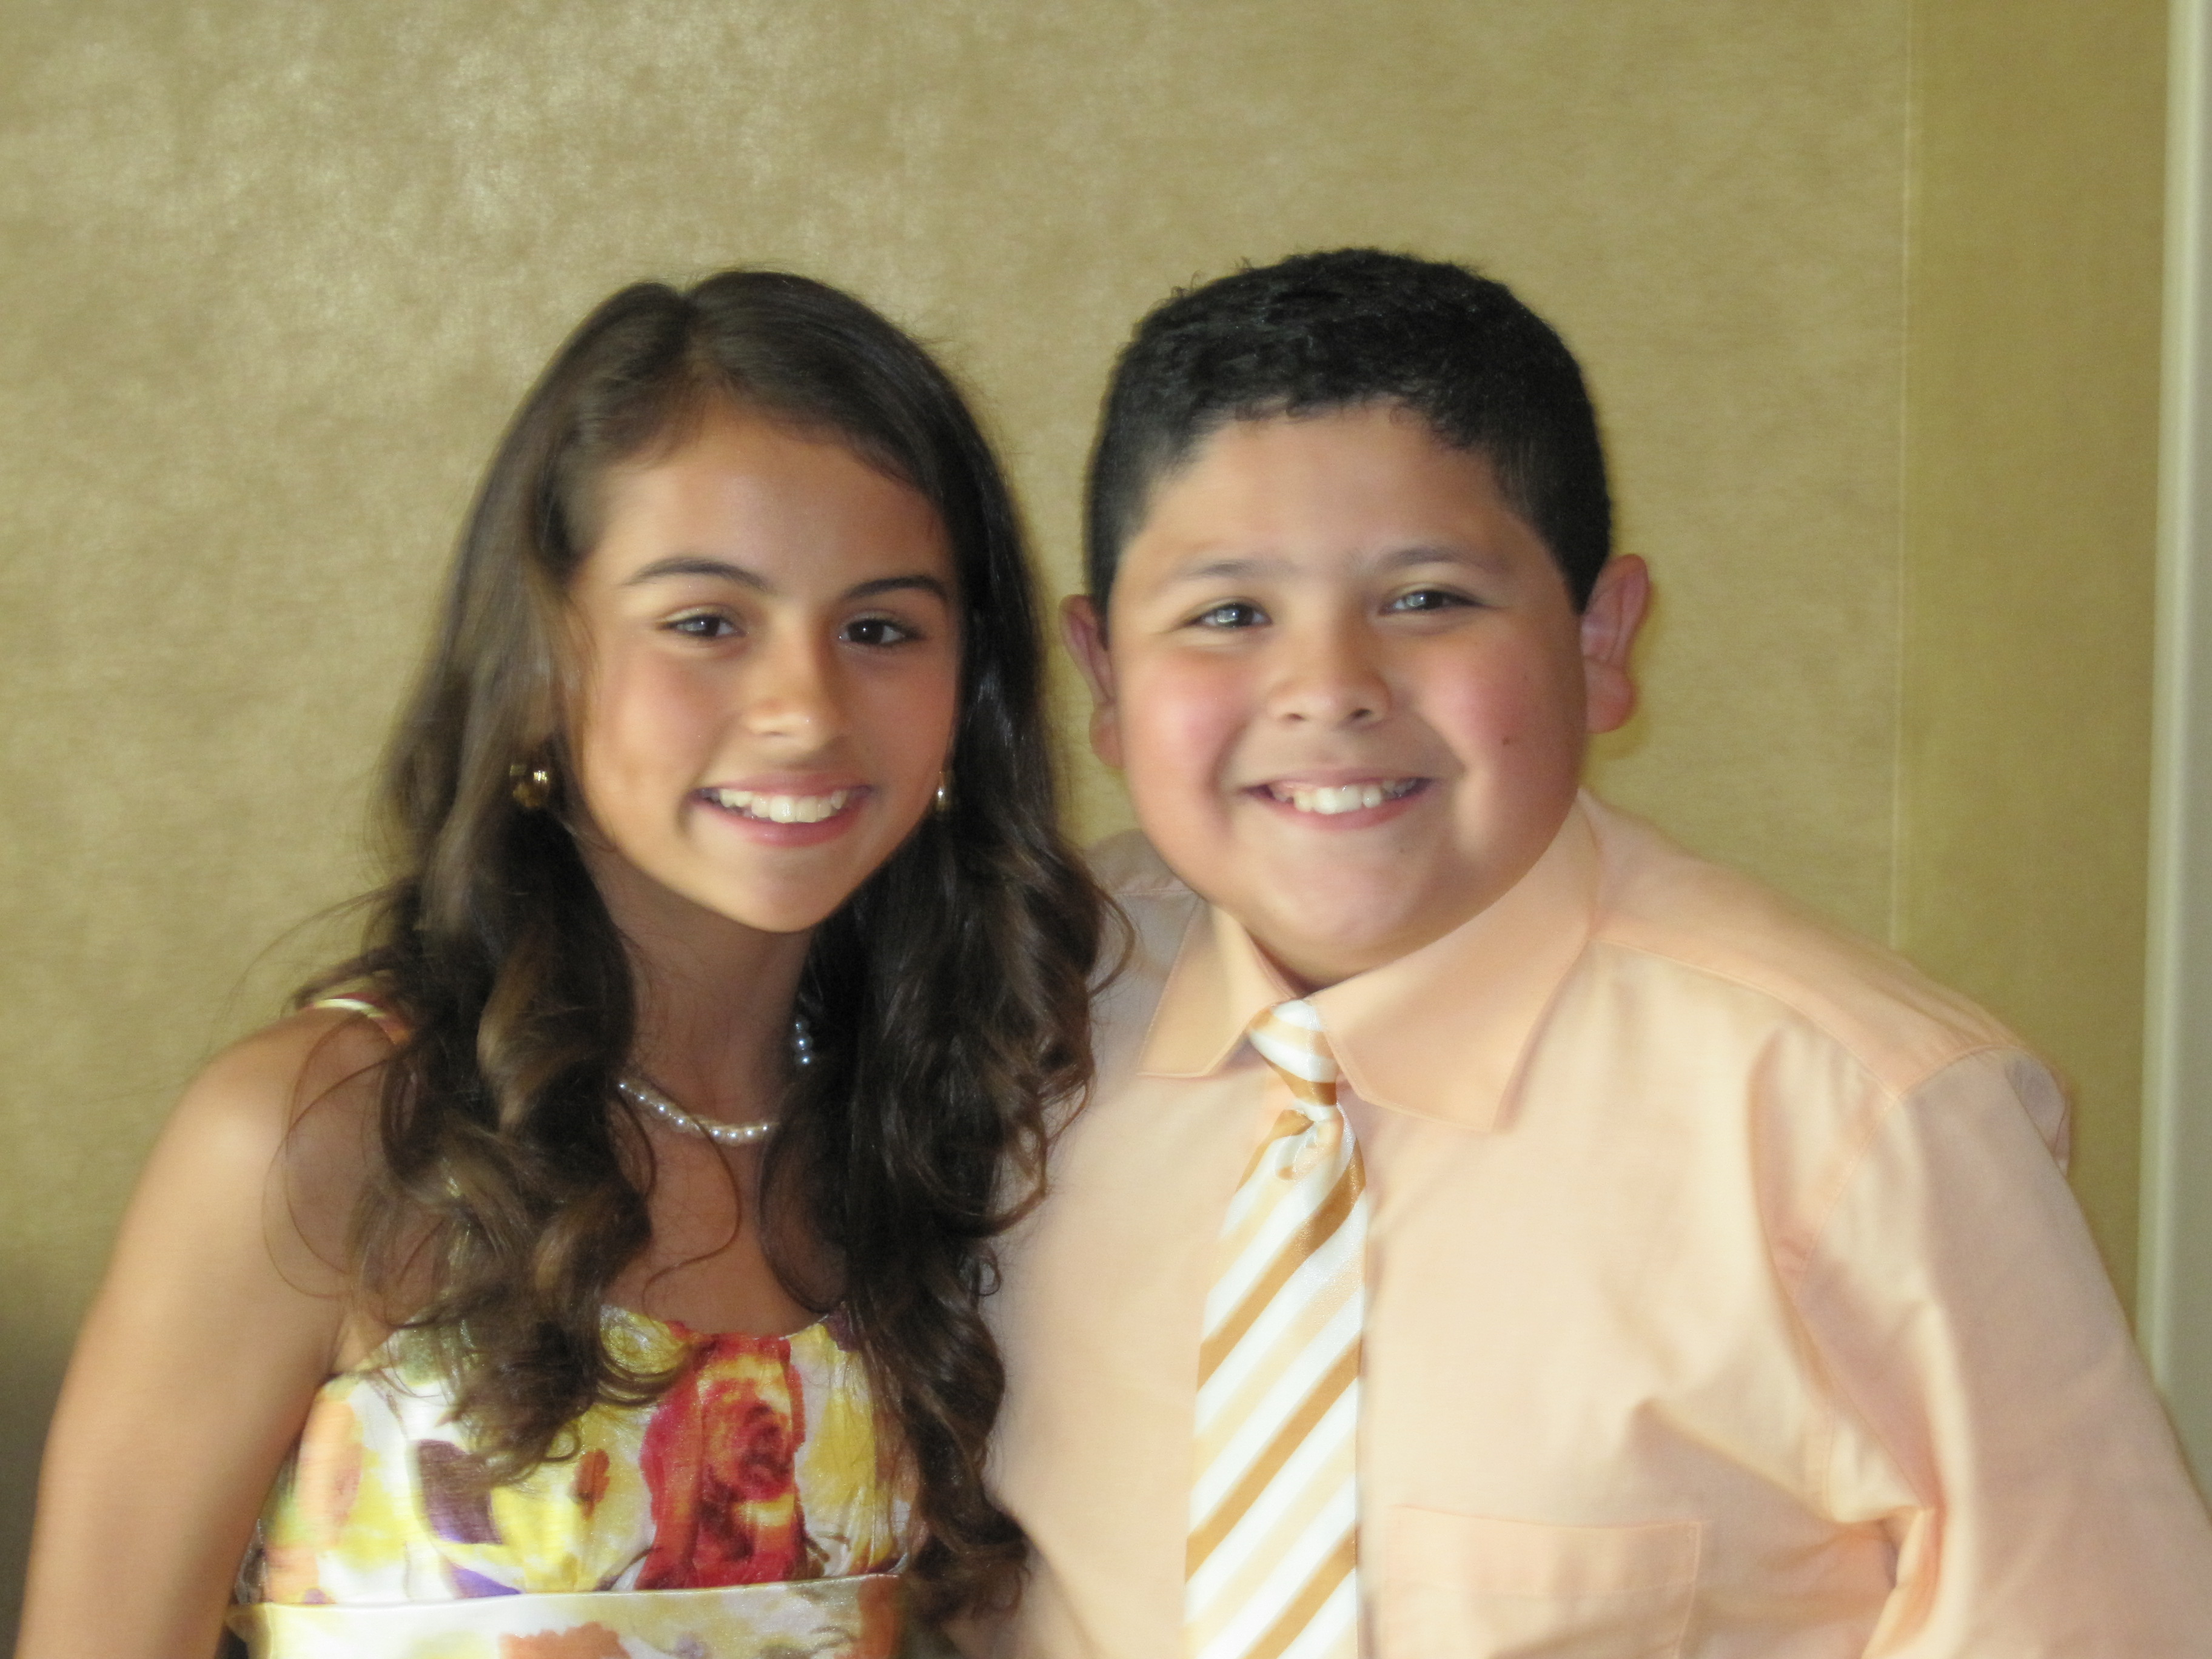 Lexi with Rico Rodriguez